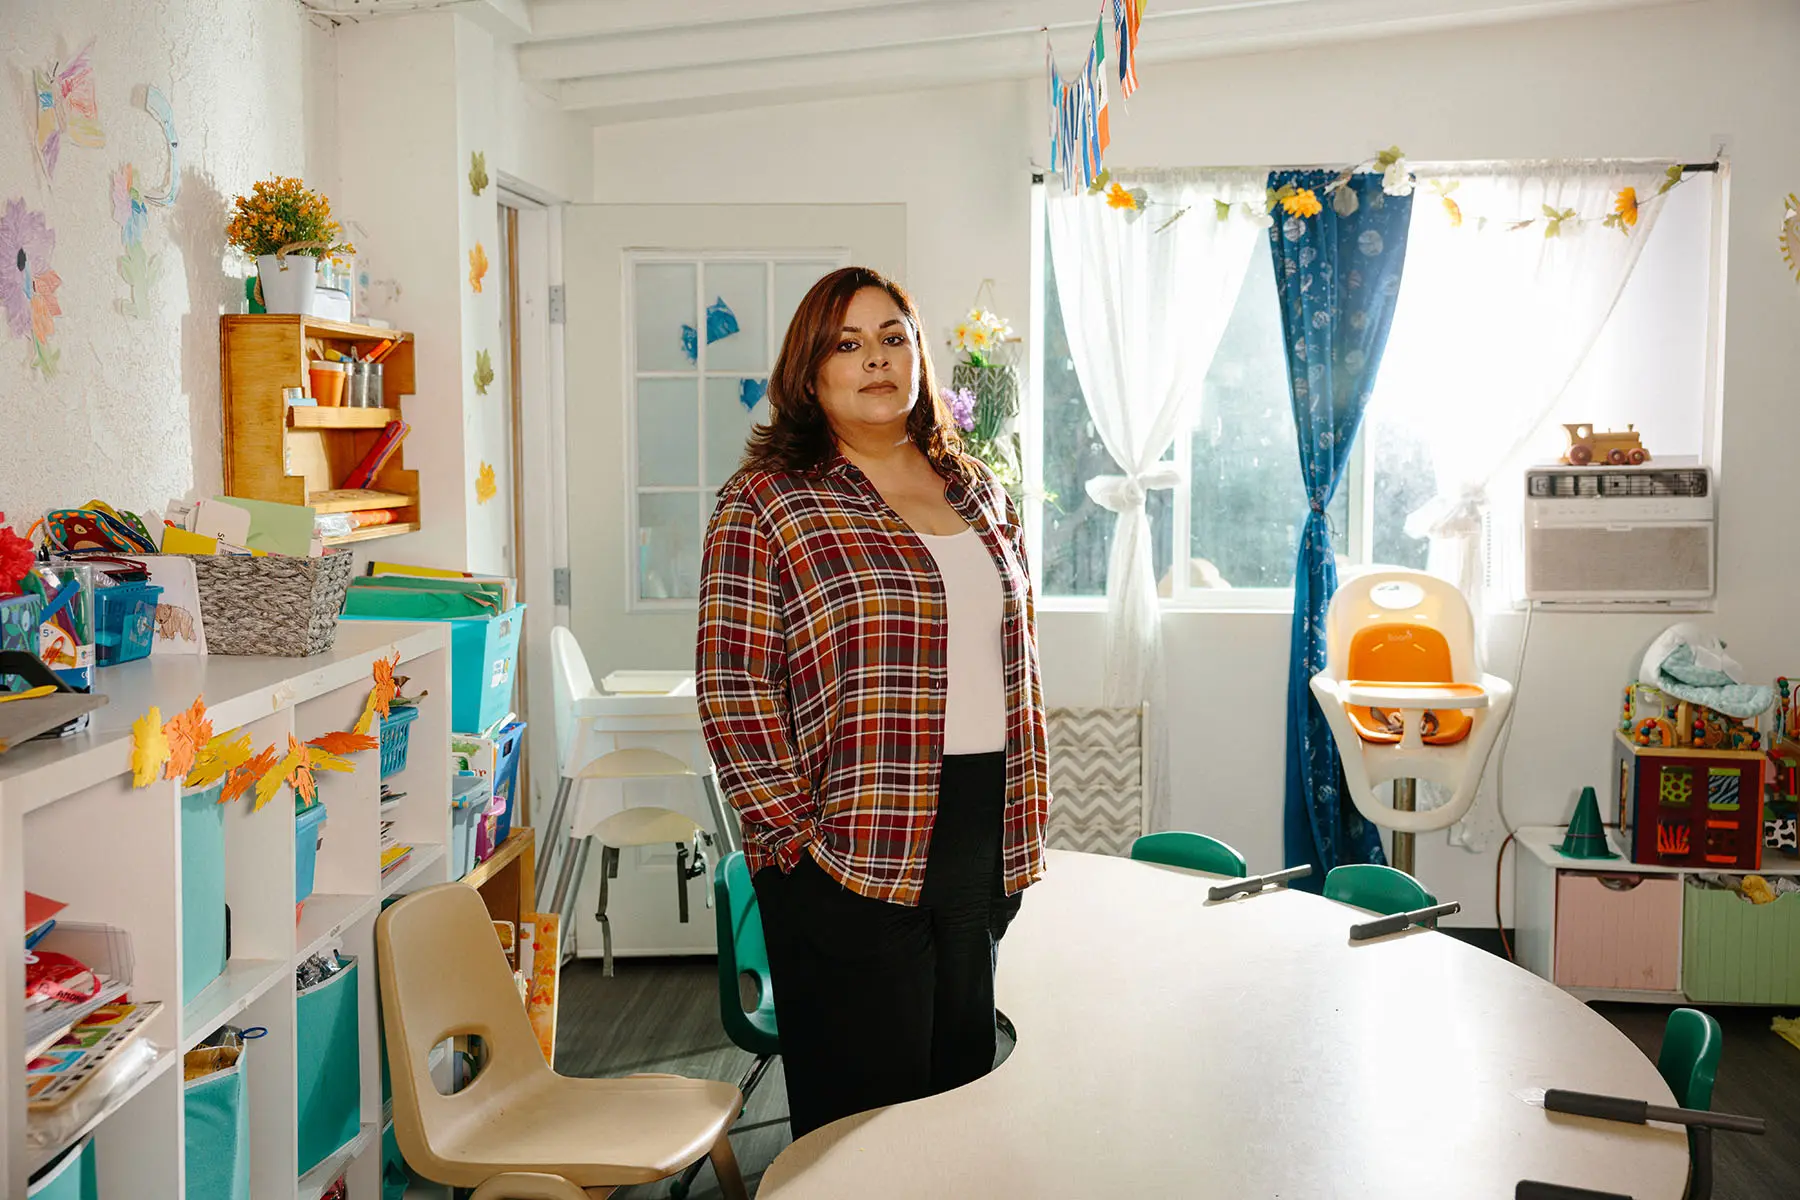 Latina child care providers see America headed for a crisis